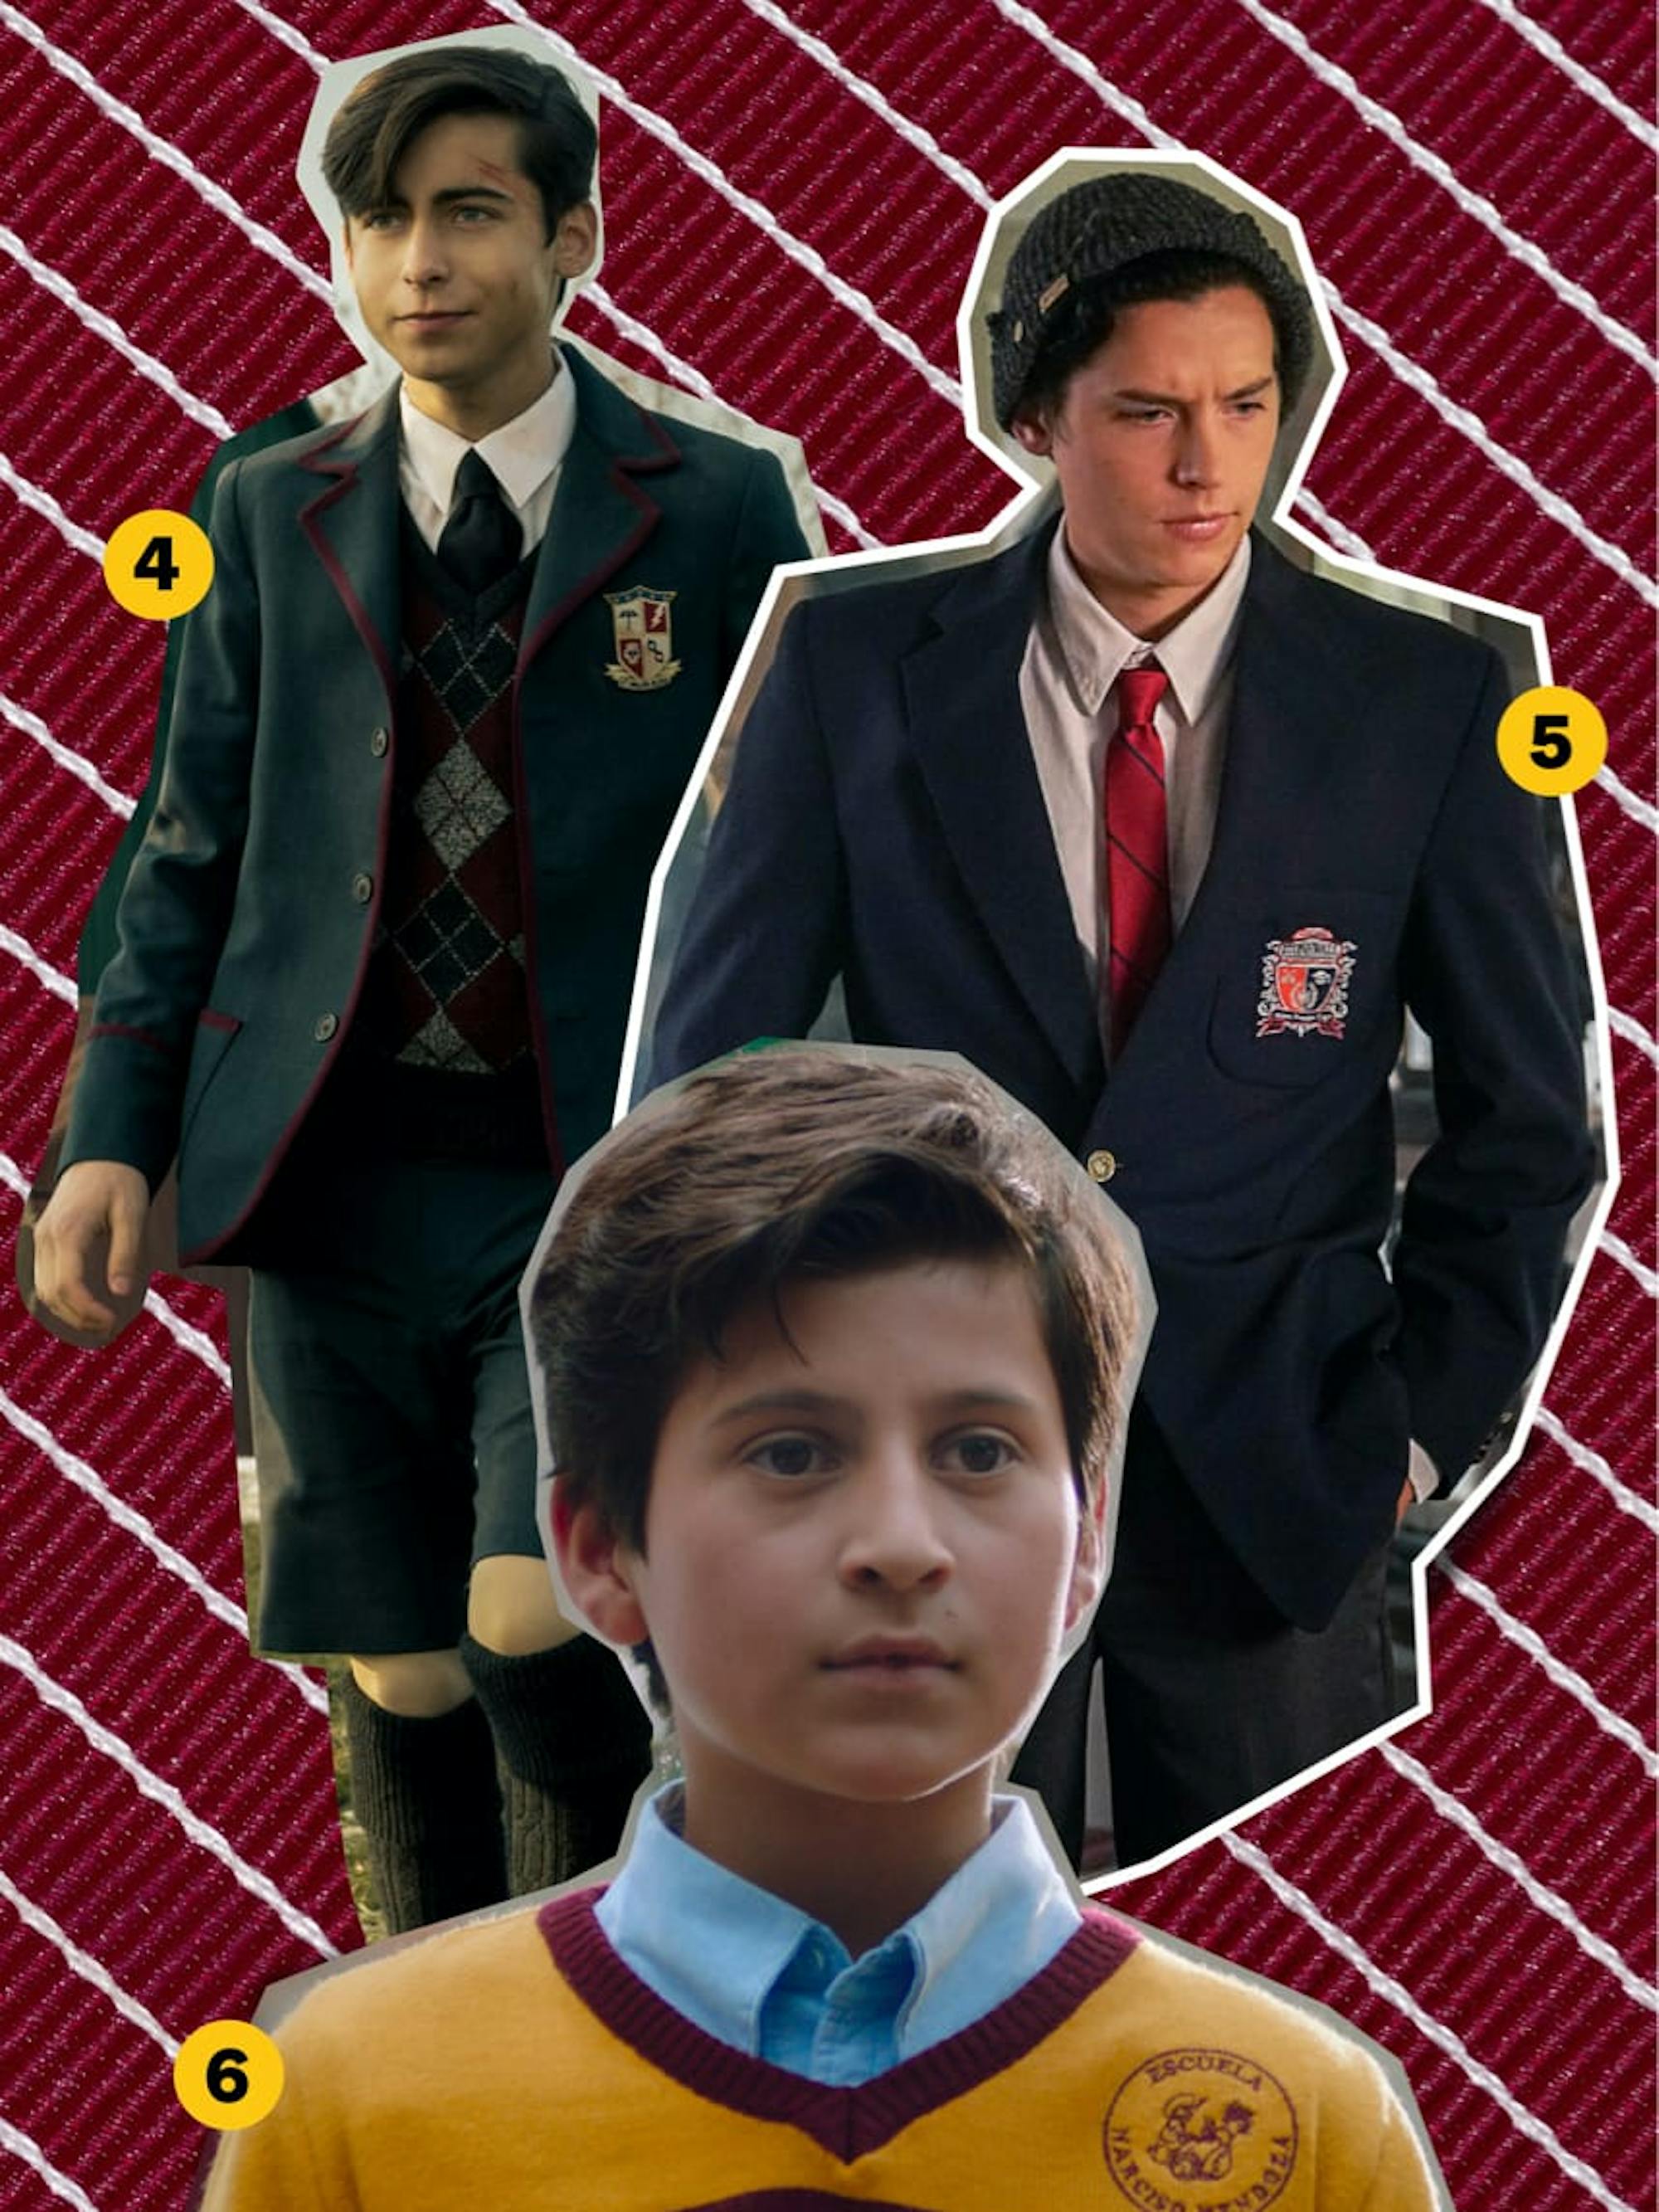 Clockwise: Aidan Gallagher (The Umbrella Academy), Cole Sprouse (Riverdale), and Hánssel Casillas (All the Freckles in the World) are cut out and collaged over a red and white striped, textured background. They don their school uniforms; Aidan and Cole’s include blazers with their school crests, and Hánssel’s is a yellow v-neck sweater with red trim and detail over a light blue collared shirt.